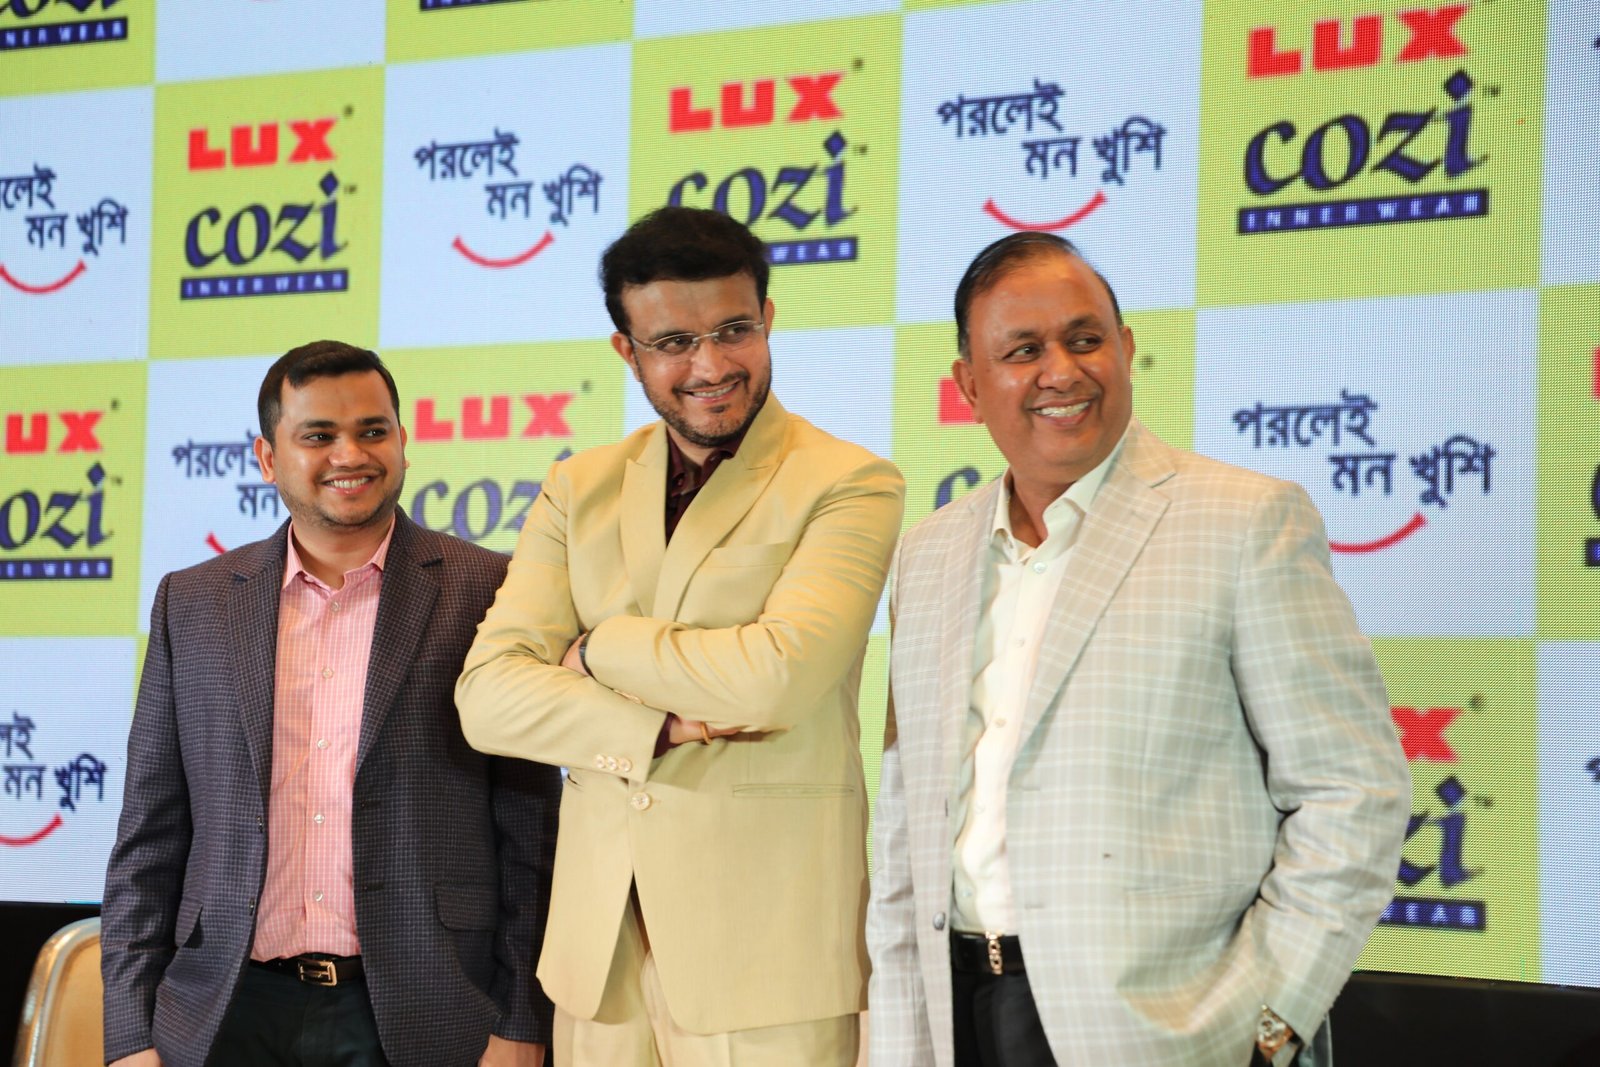 ‘Lux Cozi’ ropes in Sourav Ganguly as brand ambassador